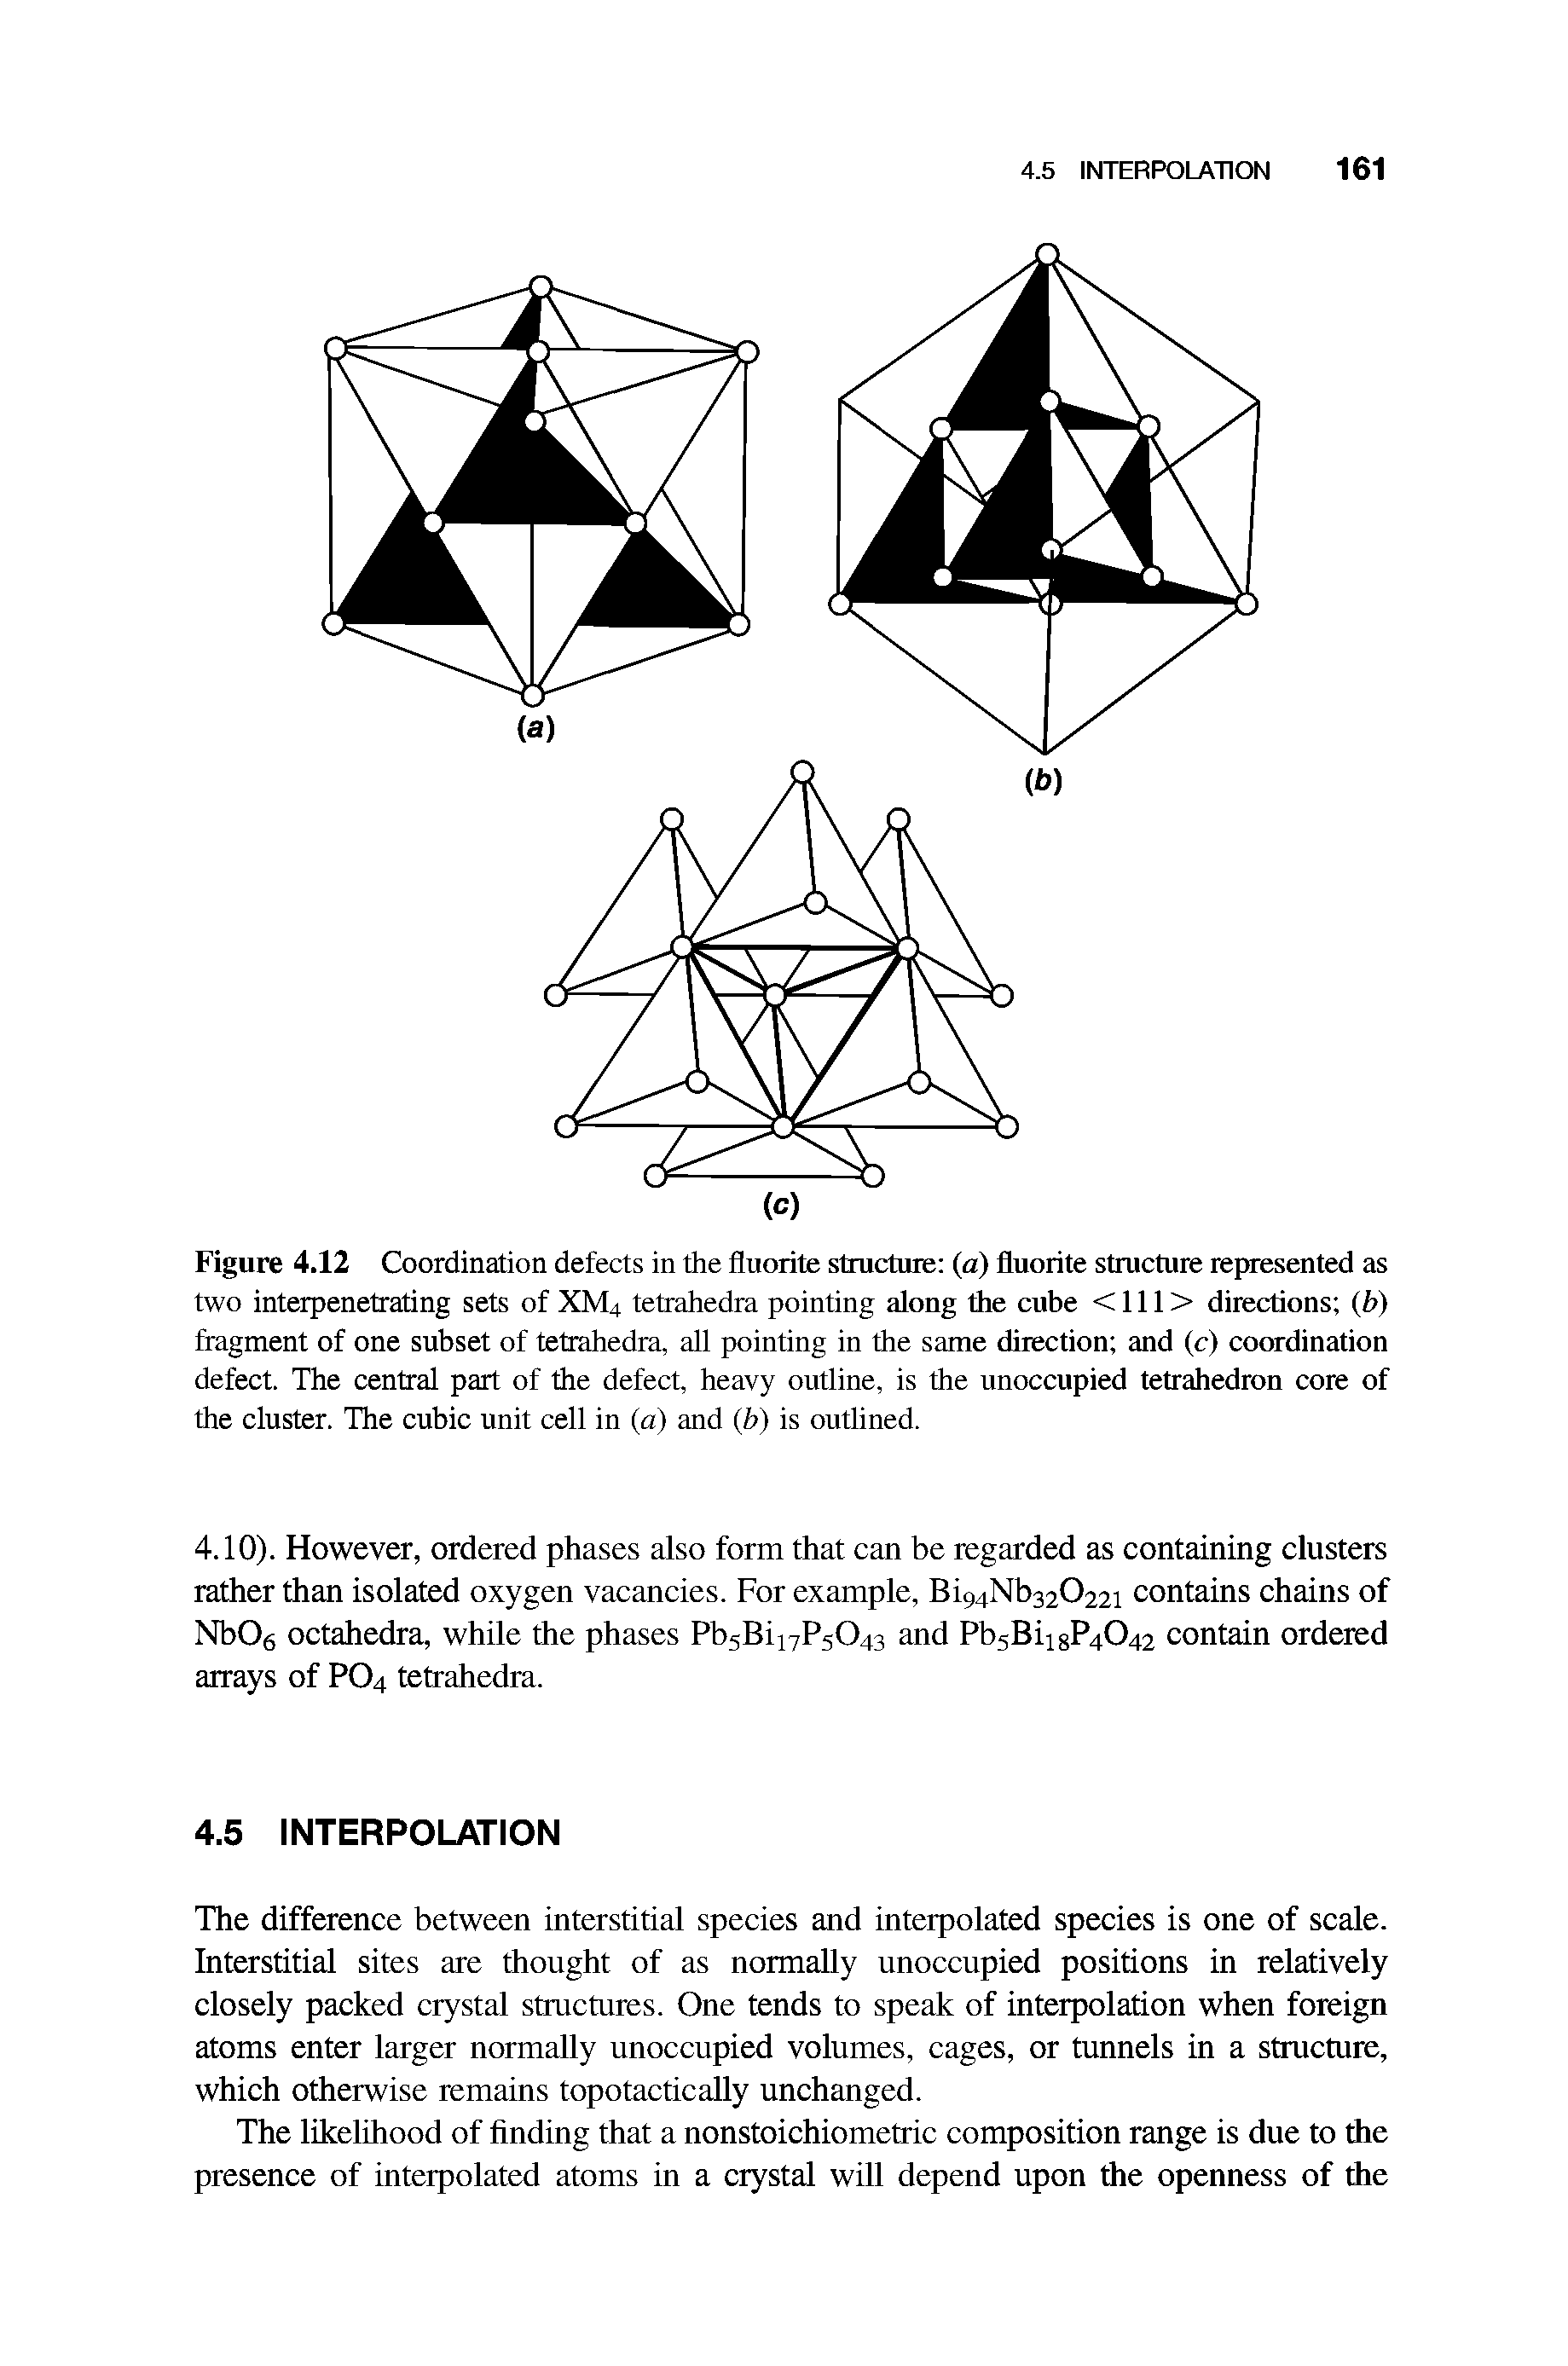 Figure 4.12 Coordination defects in the fluorite structure (a) fluorite structure represented as two interpenetrating sets of XM4 tetrahedra pointing along the cube < 111 > directions (b) fragment of one subset of tetrahedra, all pointing in the same direction and (c) coordination defect. The central part of the defect, heavy outline, is the unoccupied tetrahedron core of the cluster. The cubic unit cell in (a) and (b) is outlined.